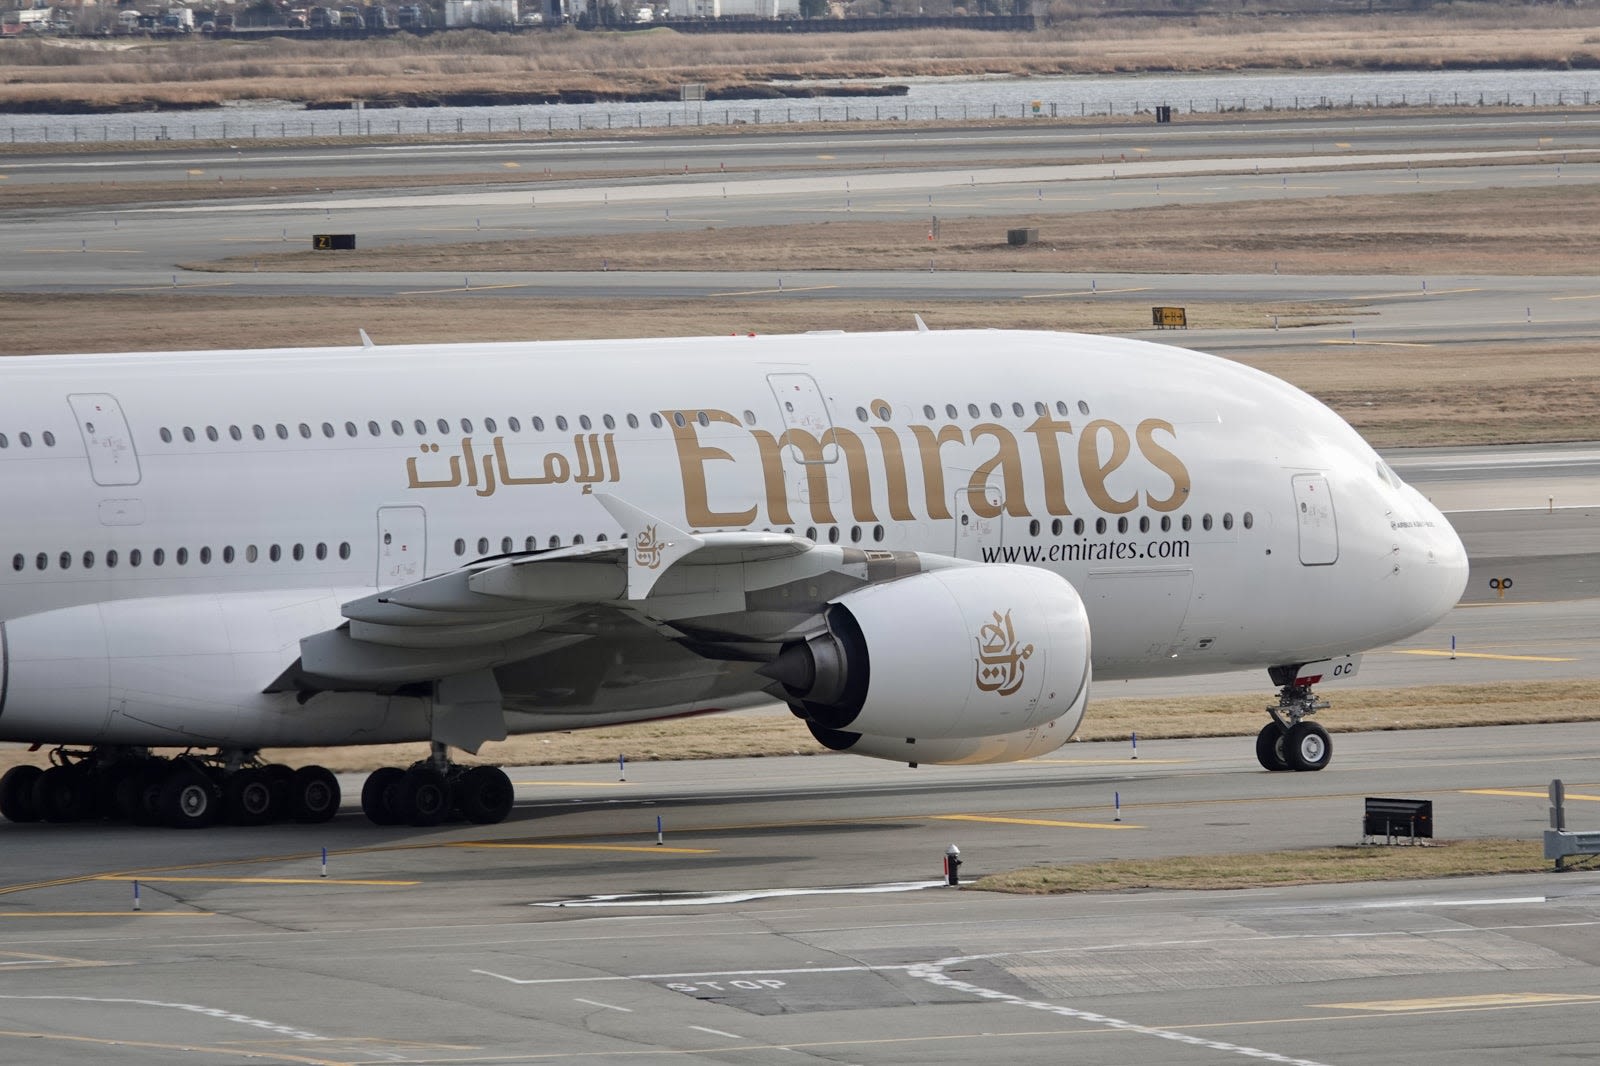 Emirates expands retrofit plans for Airbus A380, Boeing 777 jets - The Points Guy